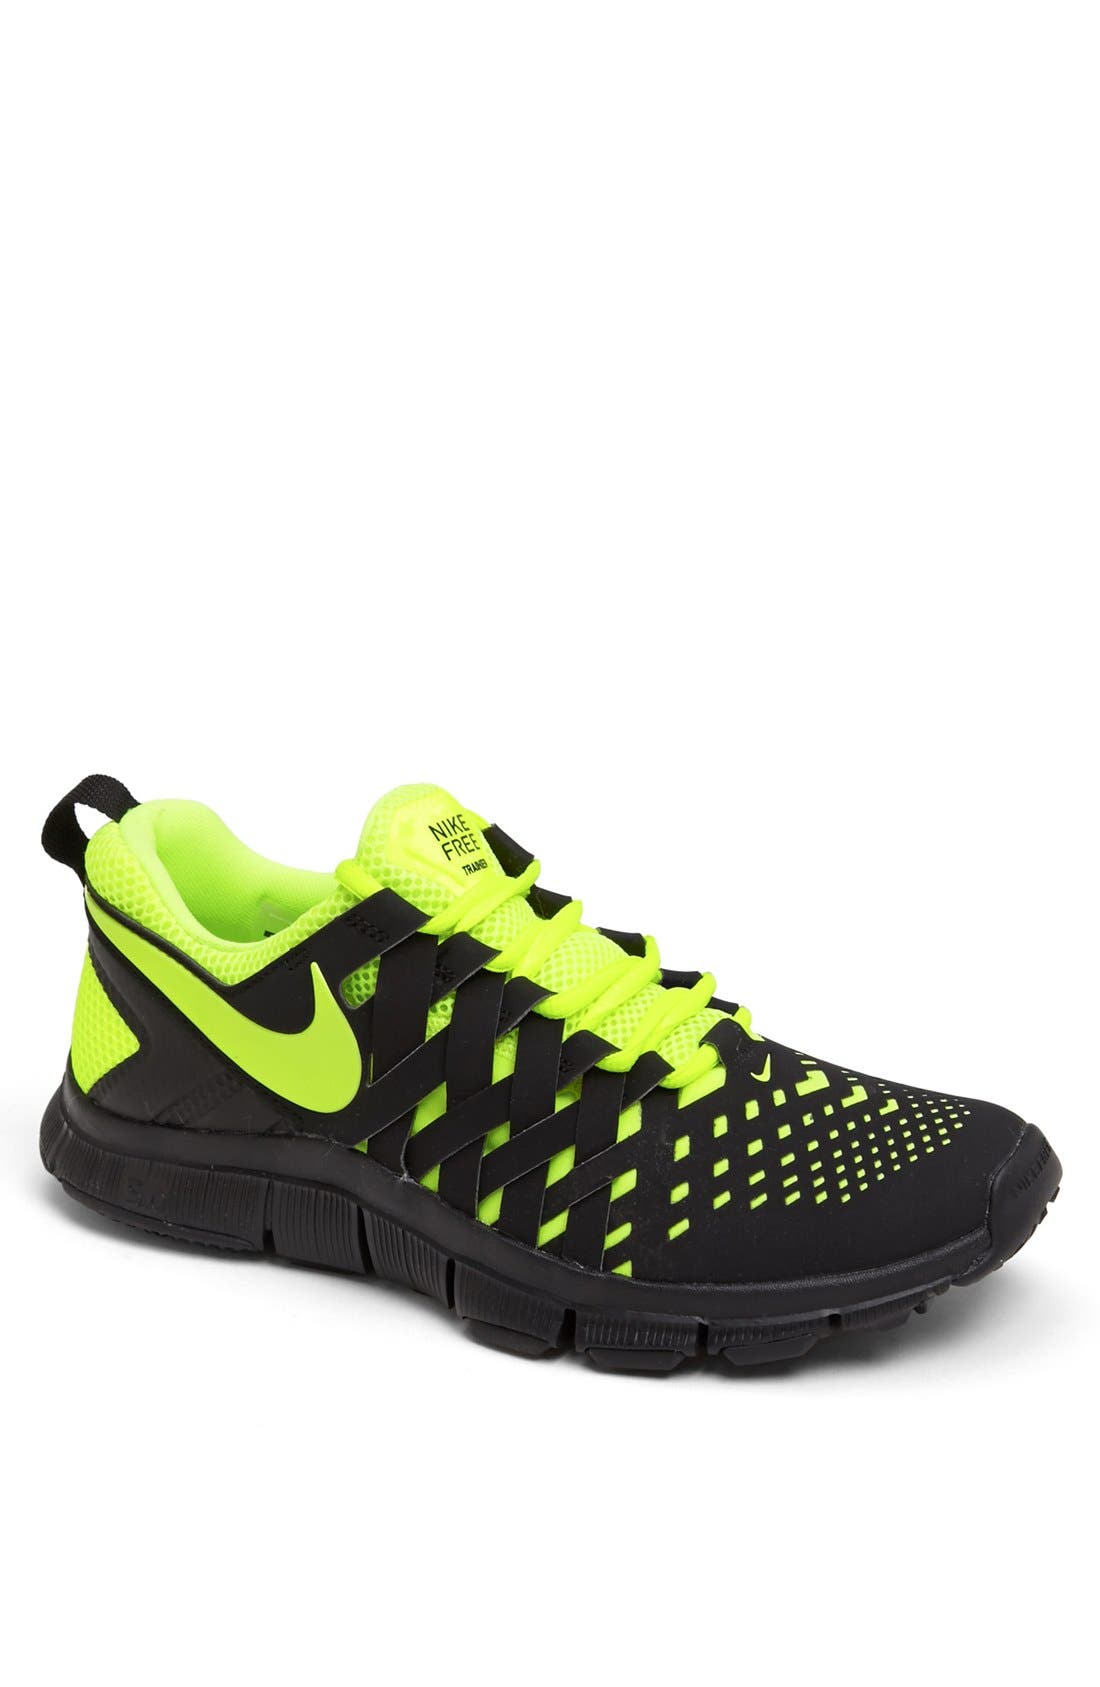 nike free trainer 5.0 opiniones